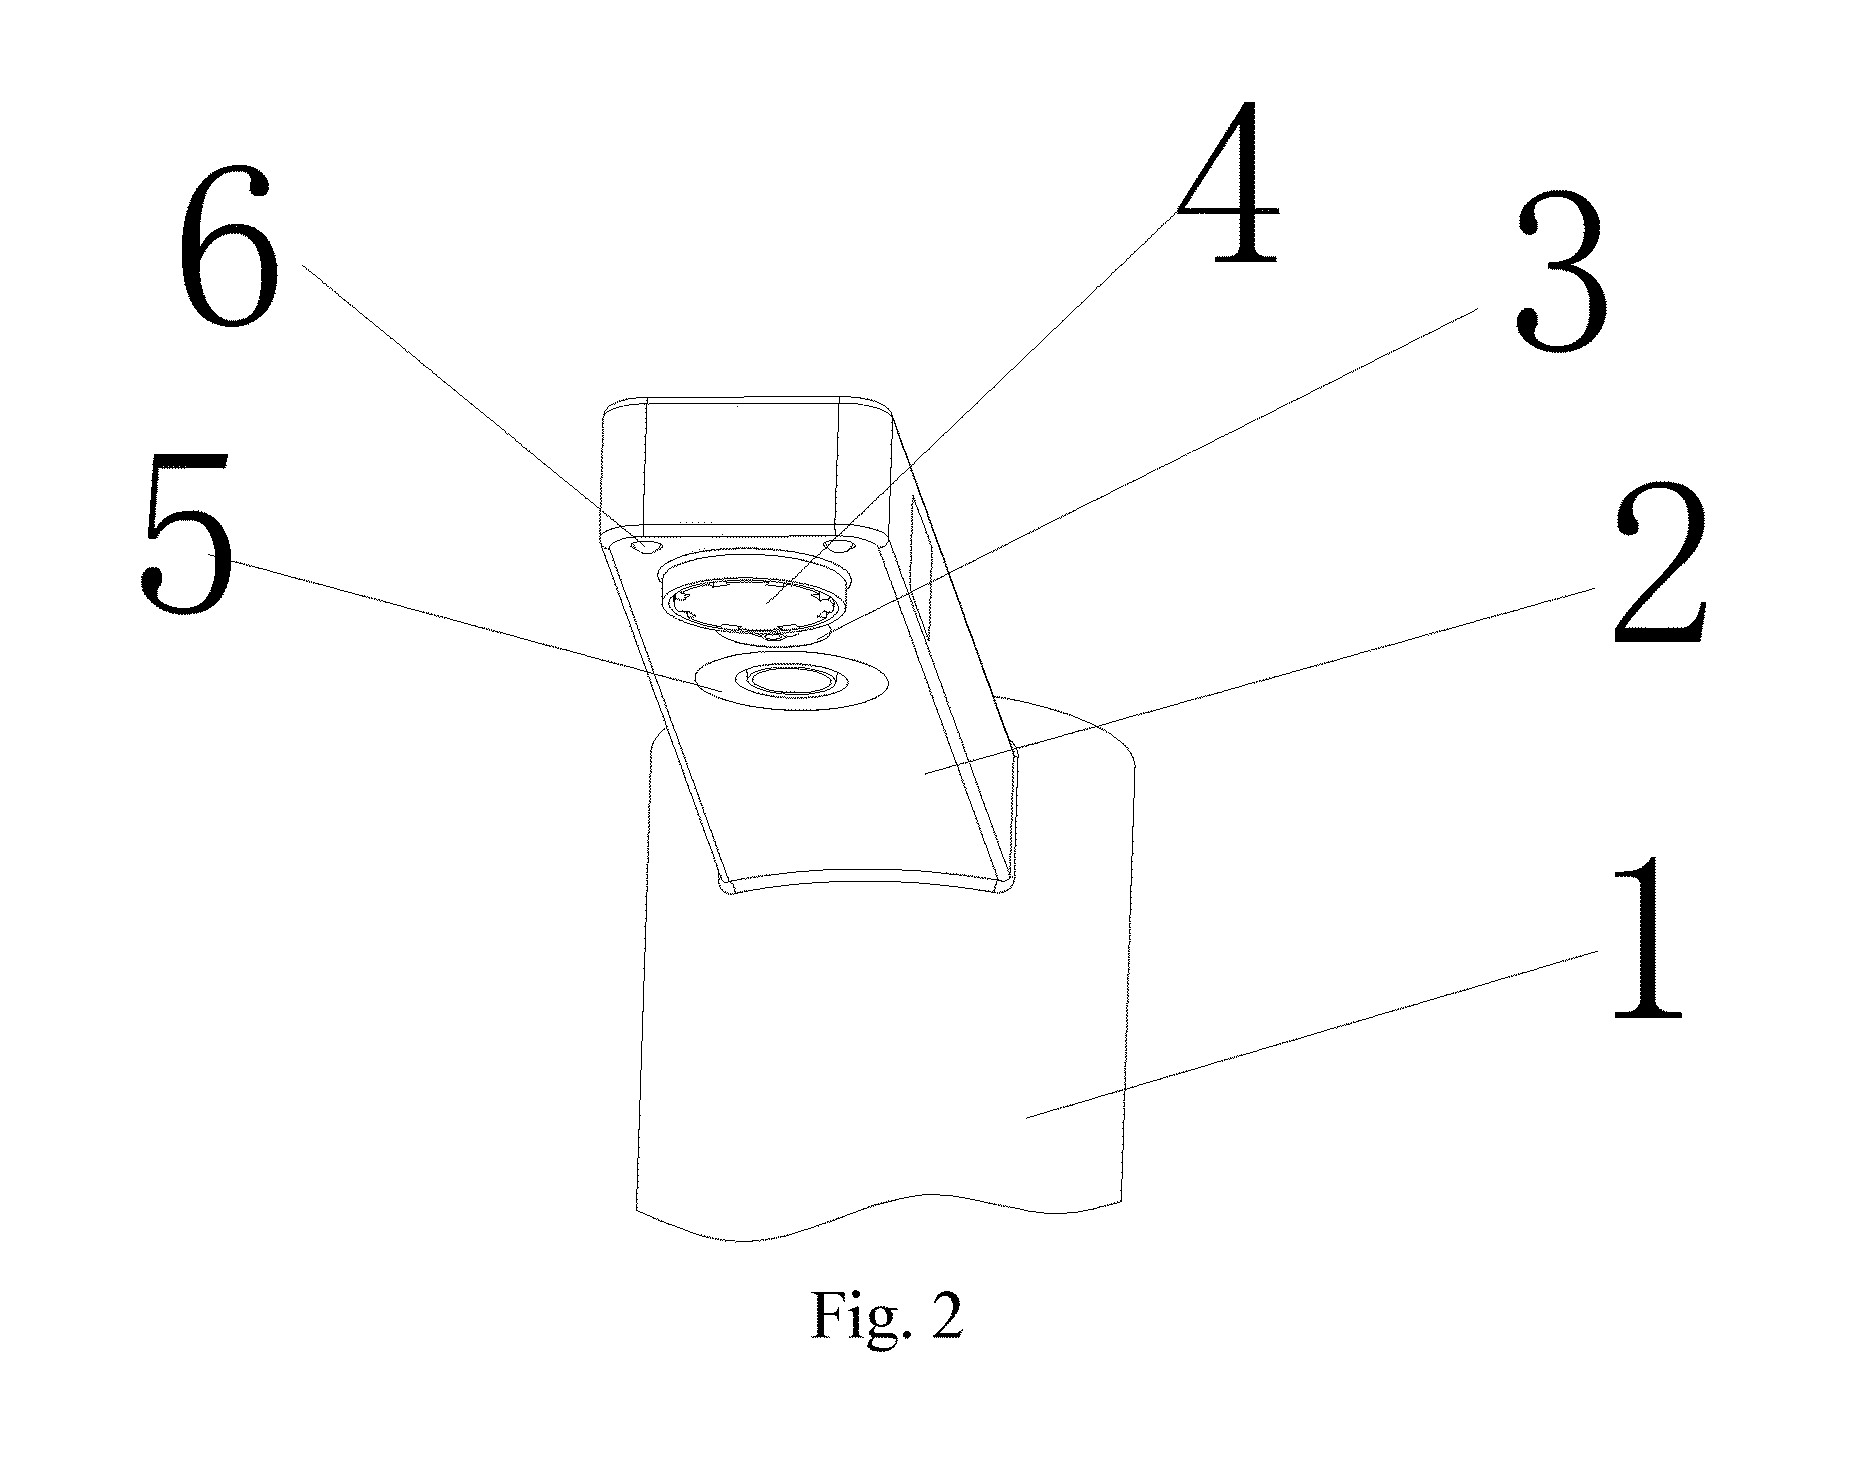 Faucet with sensing activation for blow-drying and discharge of water and liquid soap